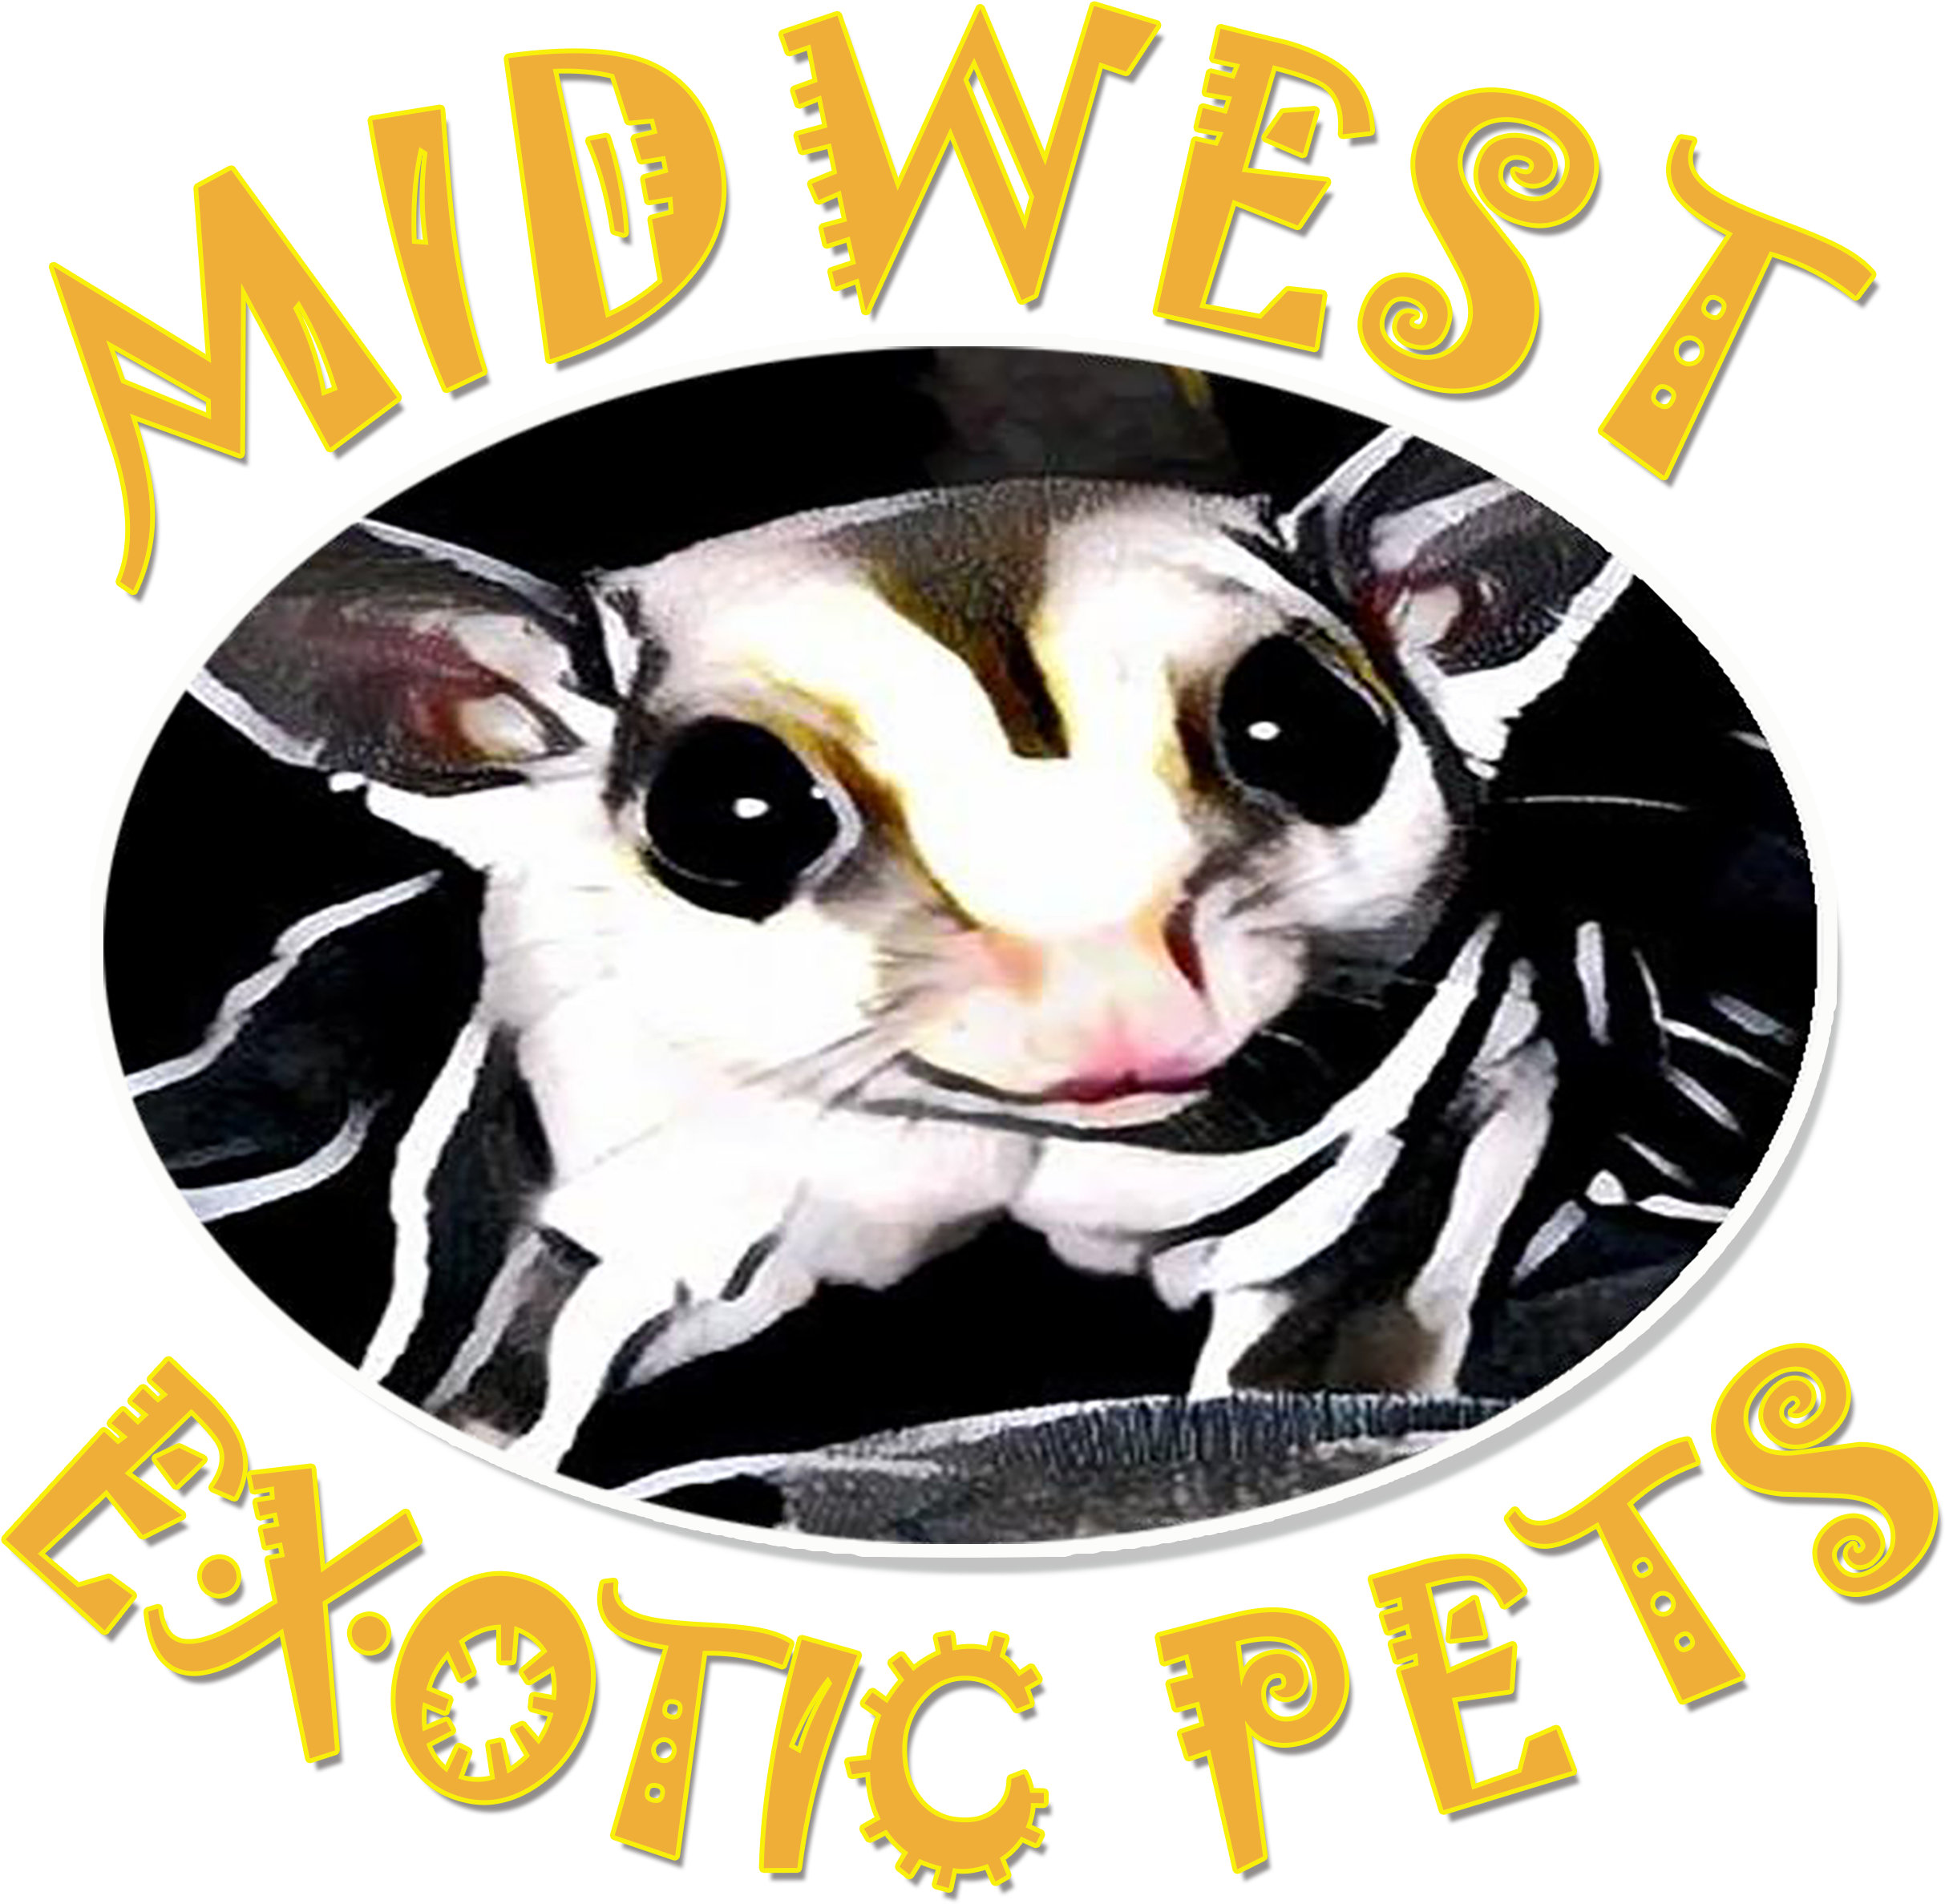 Welcome To Midwest Exotic Pets, Llc - Exotic Pet (2539x2416)